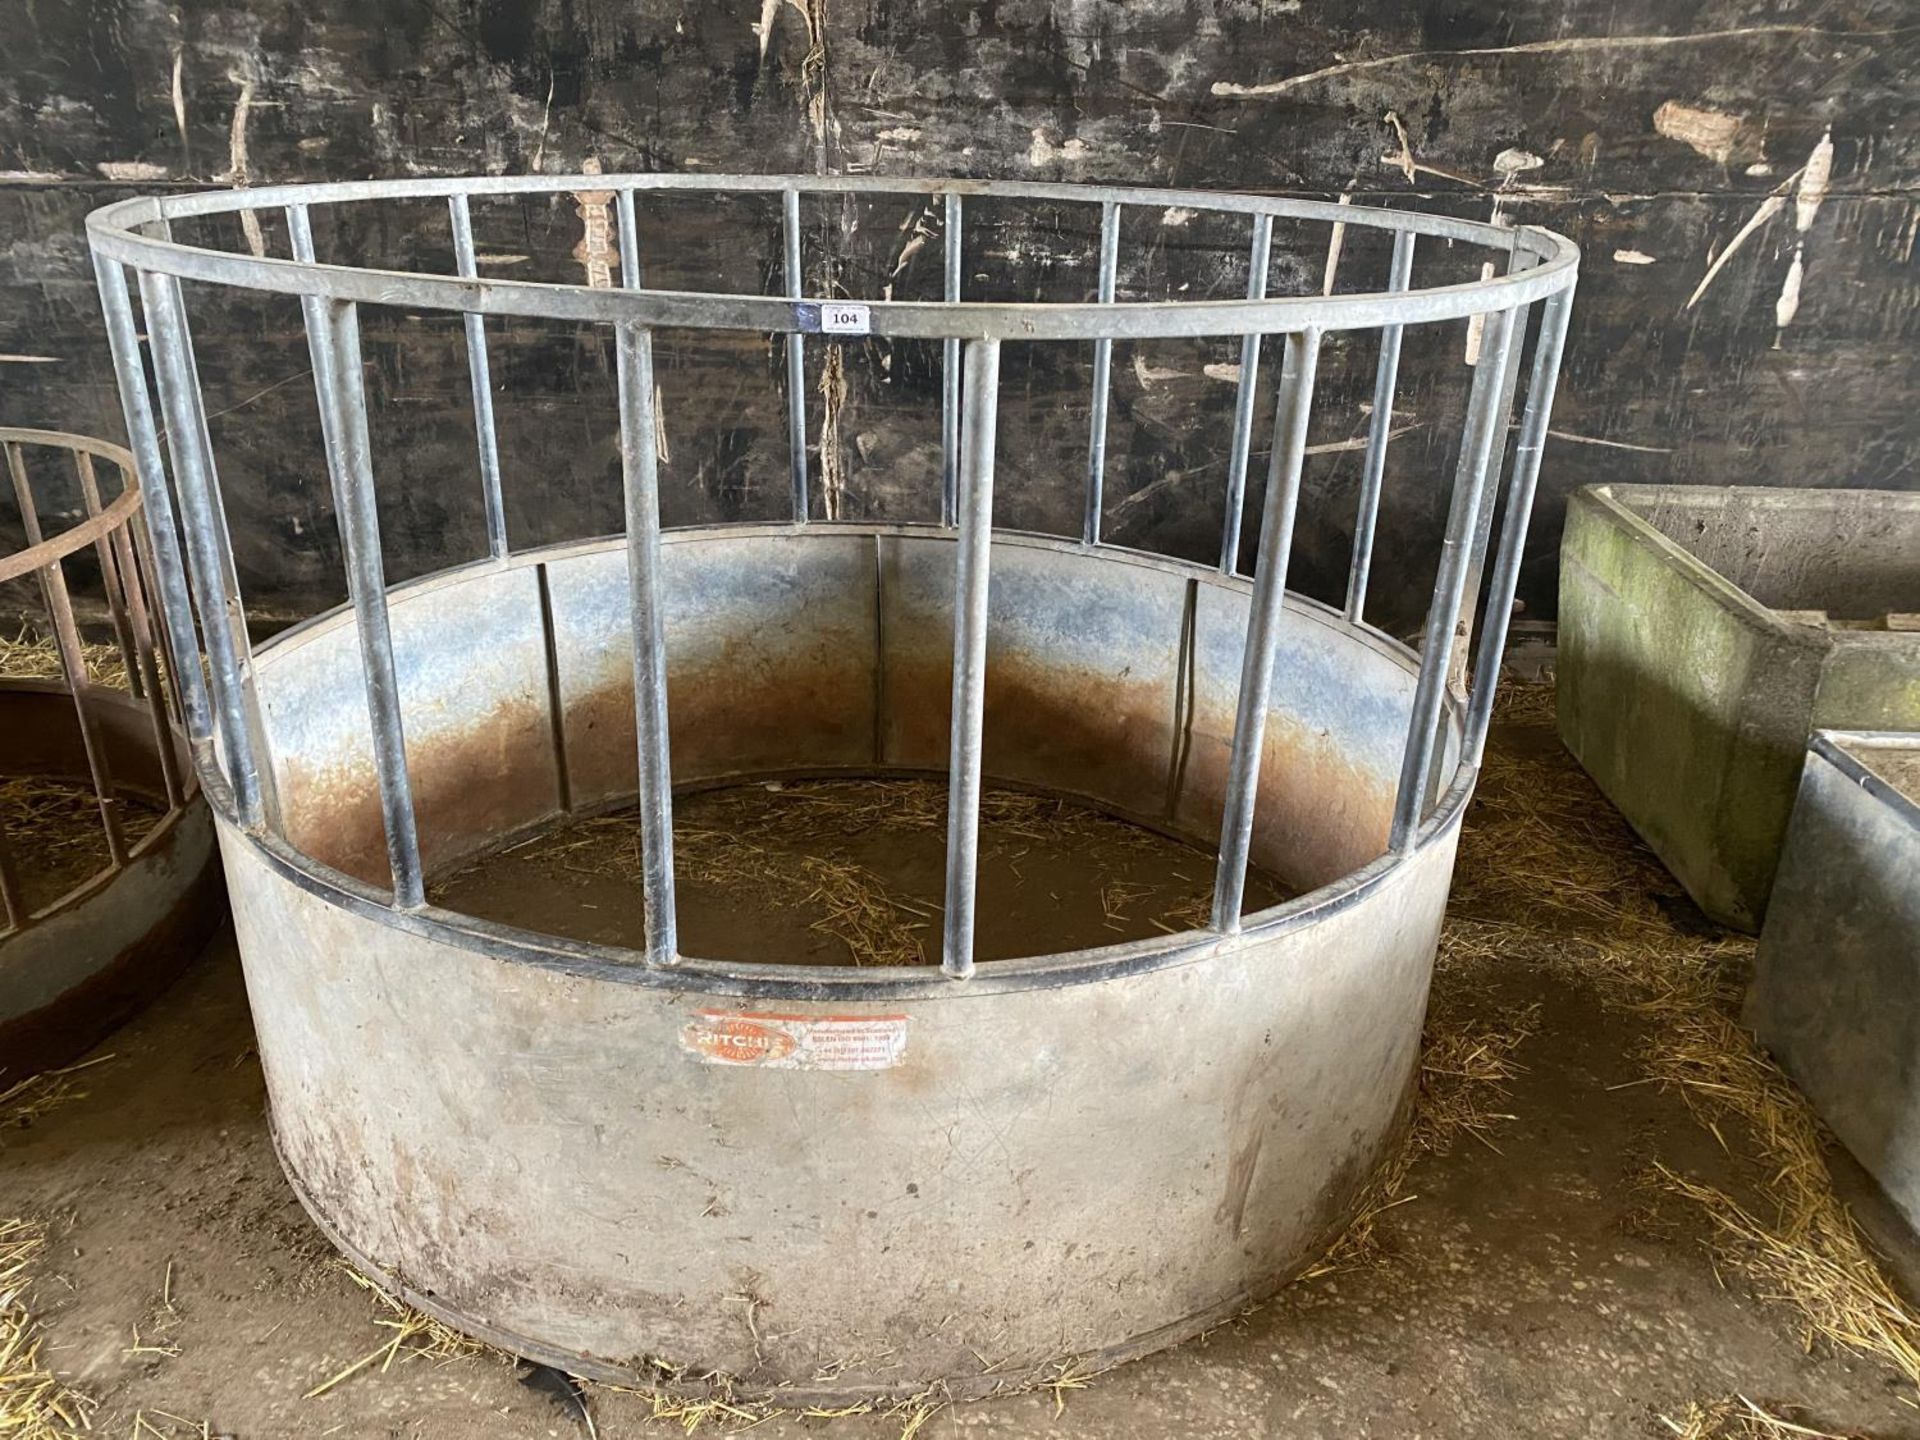 A CATTLE FEED RING